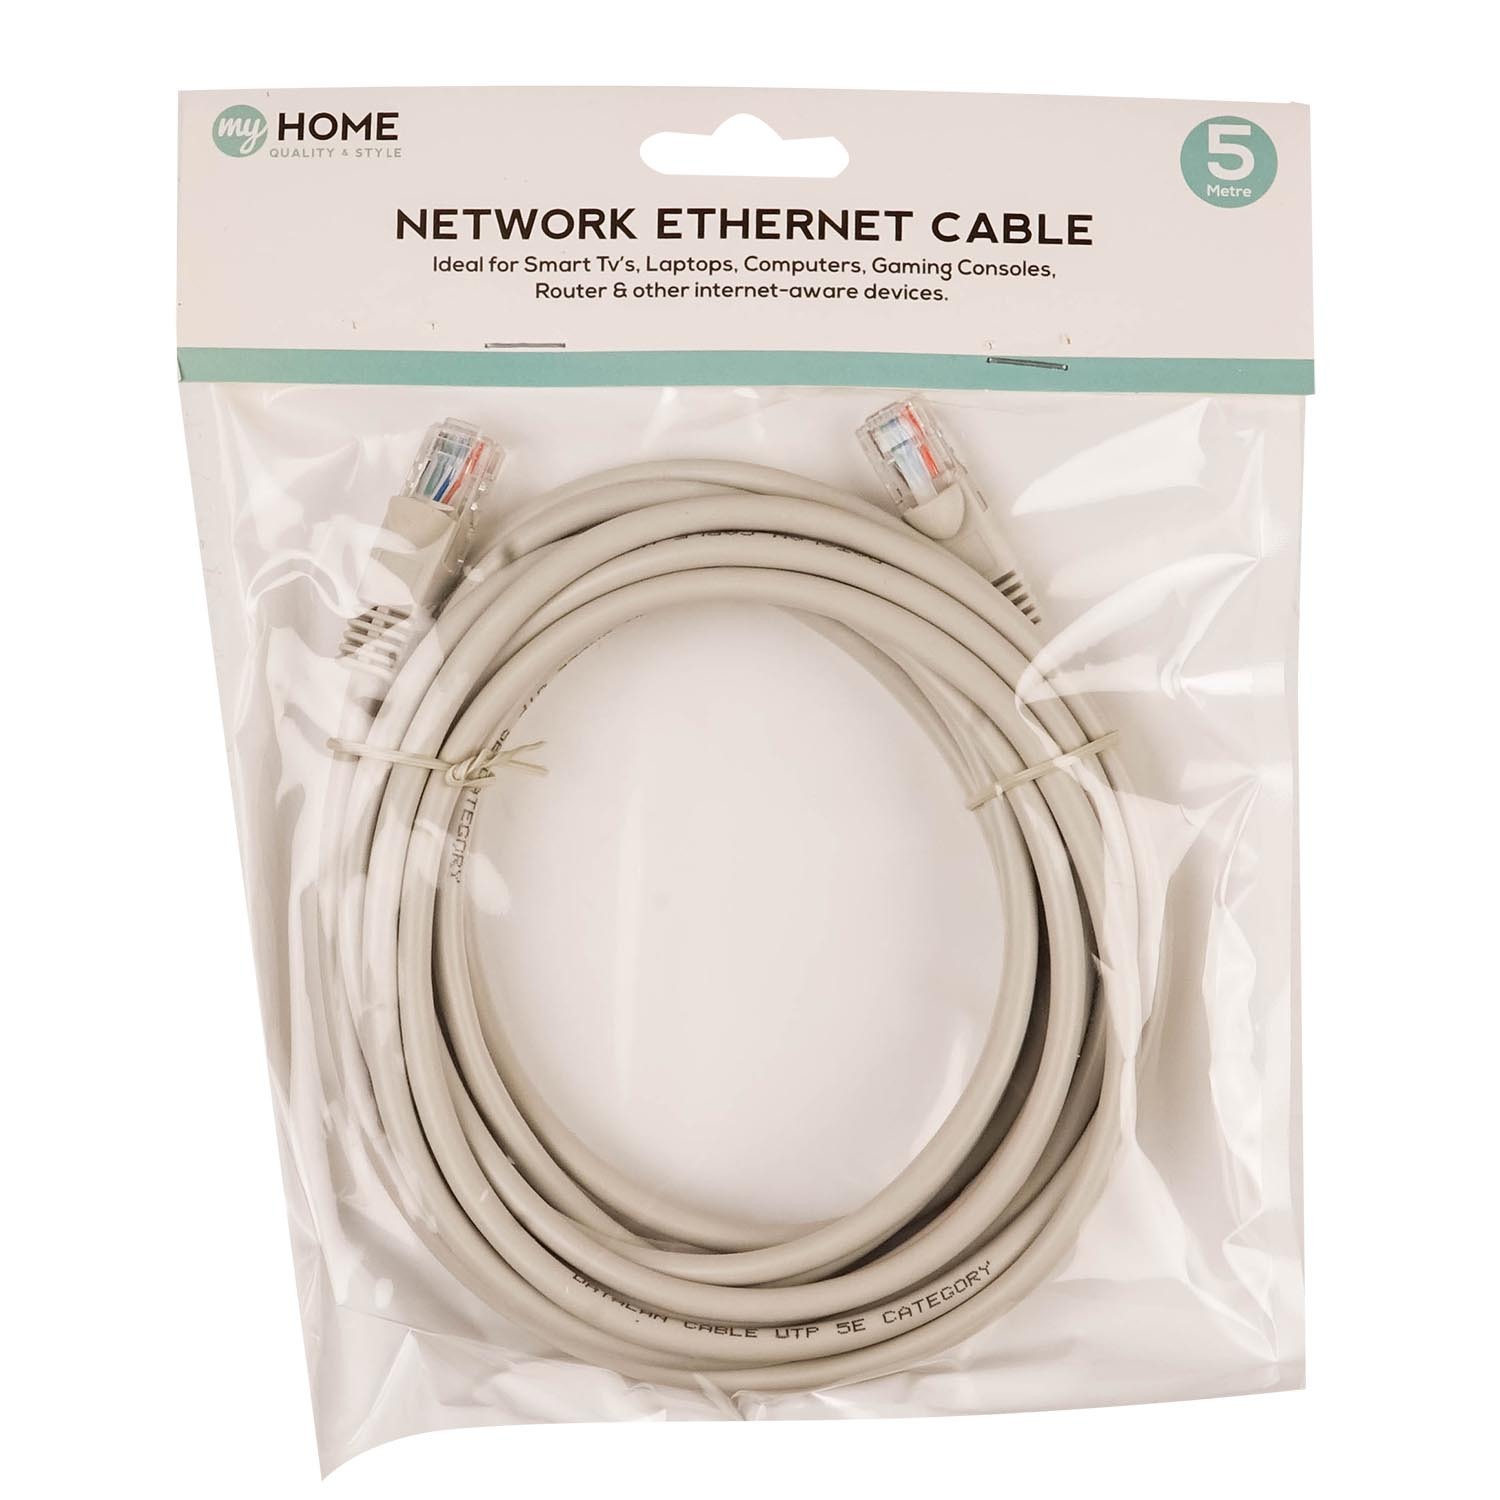 Network Ethernet Cables - White / 500cm Image 1